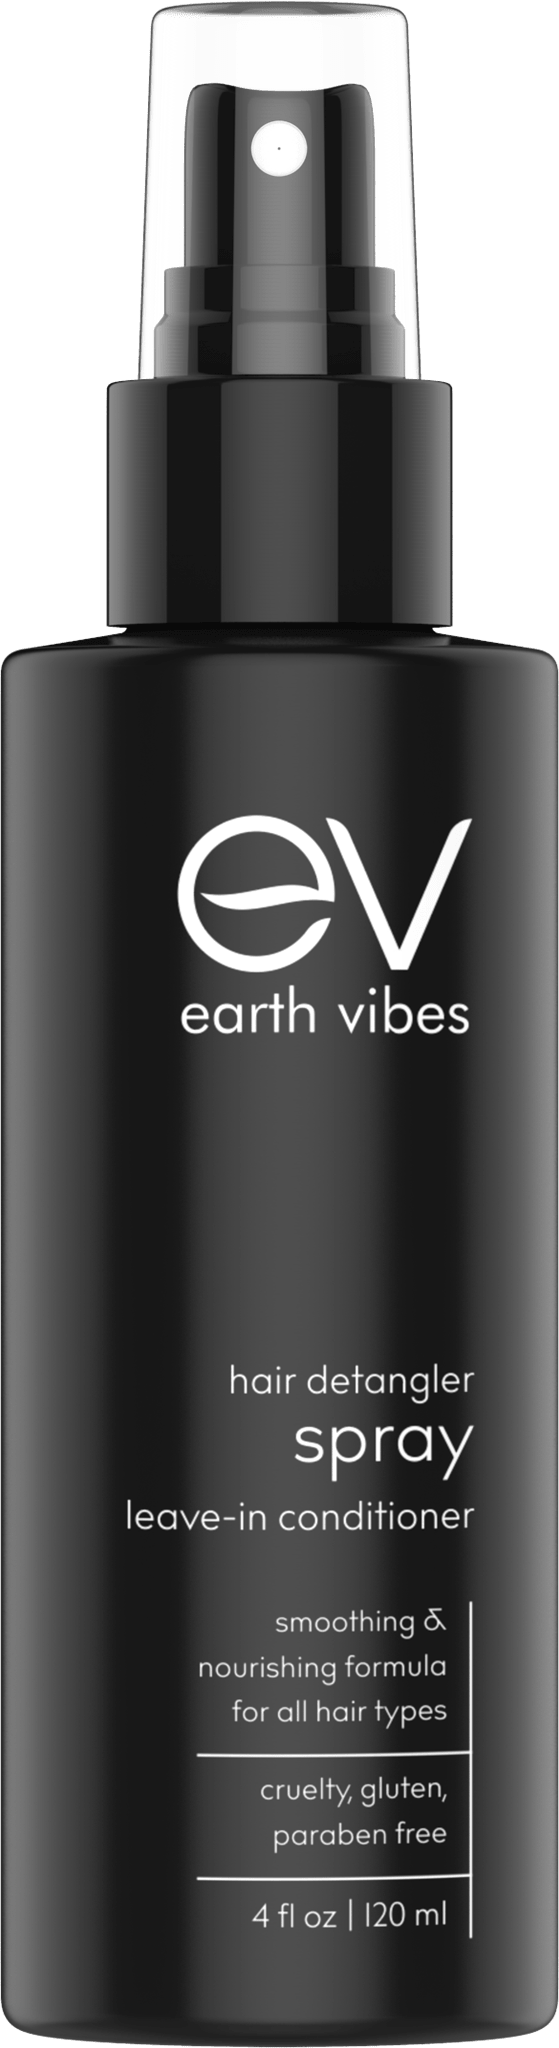 Earth Vibes Natural Hair Detangler, Leave-In Conditioner Spray For Kids & Adults - All Hair Types - Color Safe Cruelty, Sulfate - Paraben Free - Made With Organic Jojoba And Avocado Oil